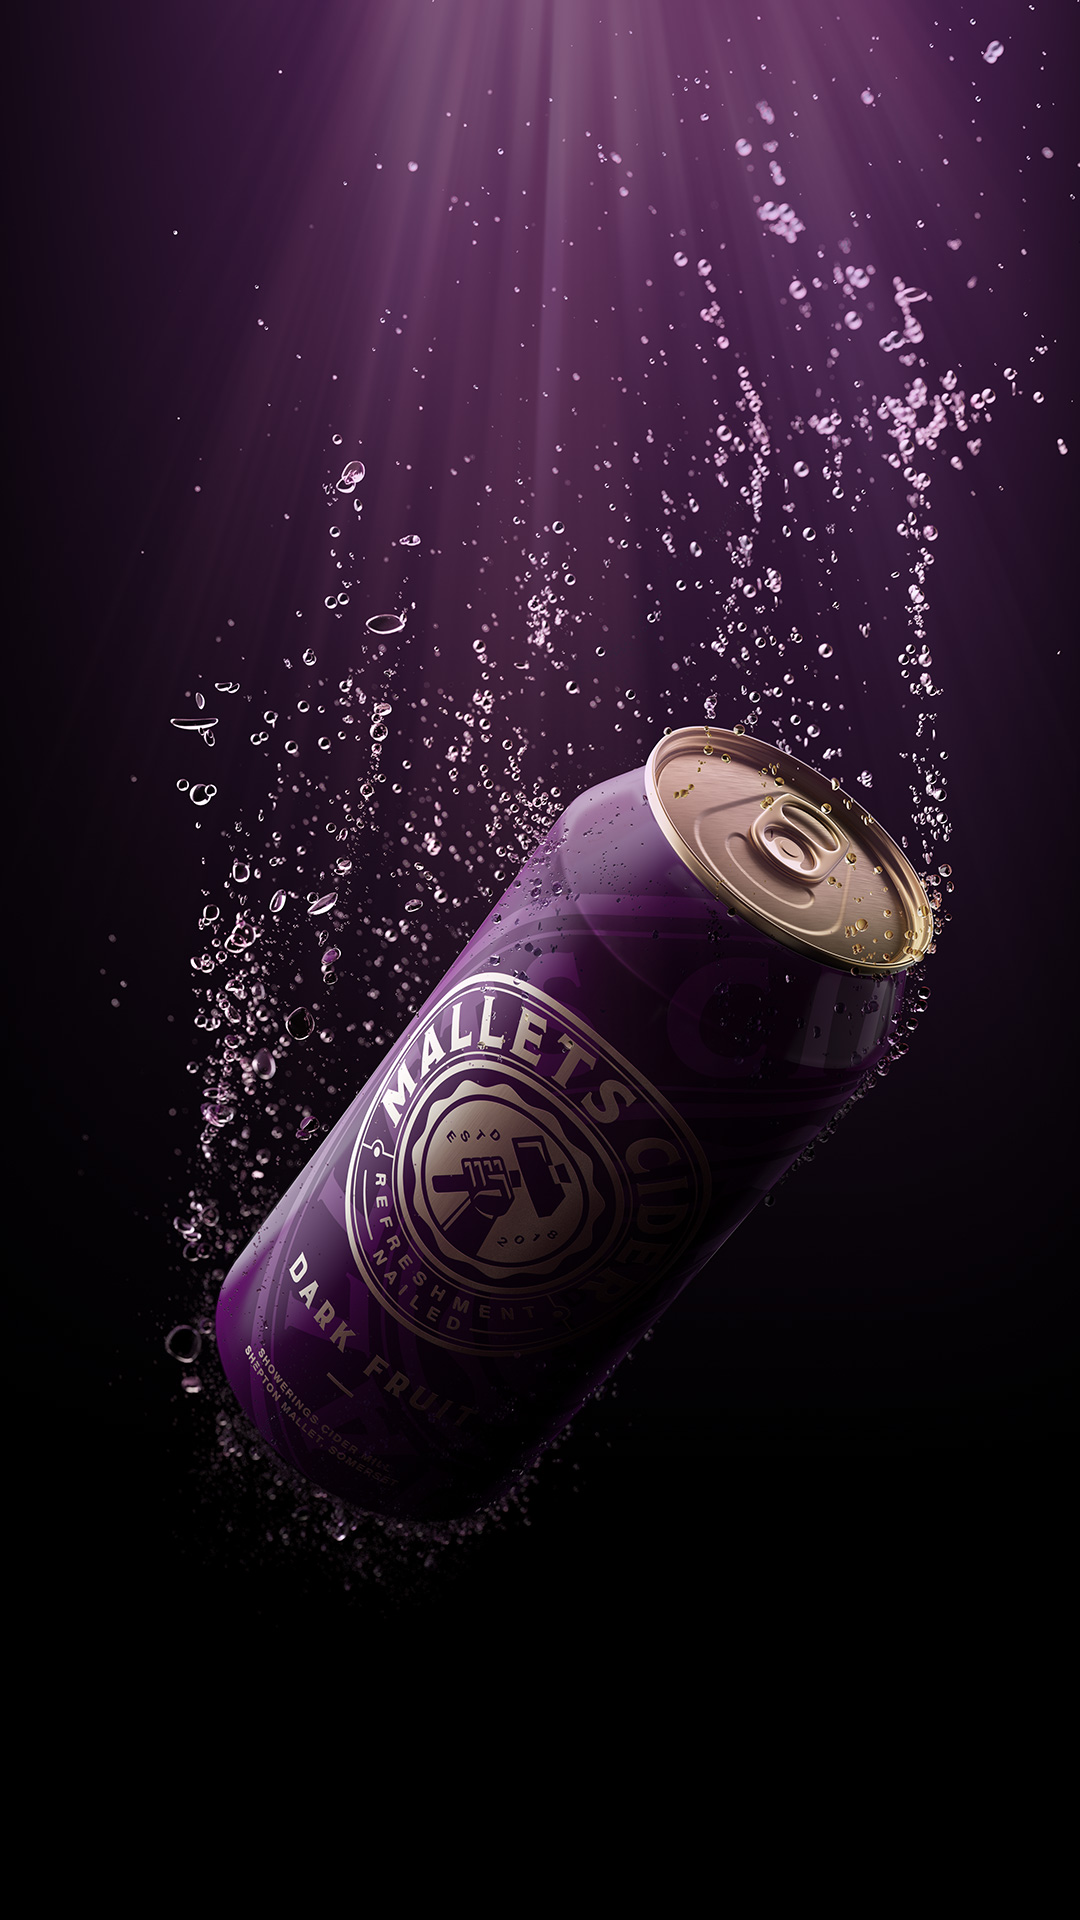 mallets-cider-3d-can-renders-08